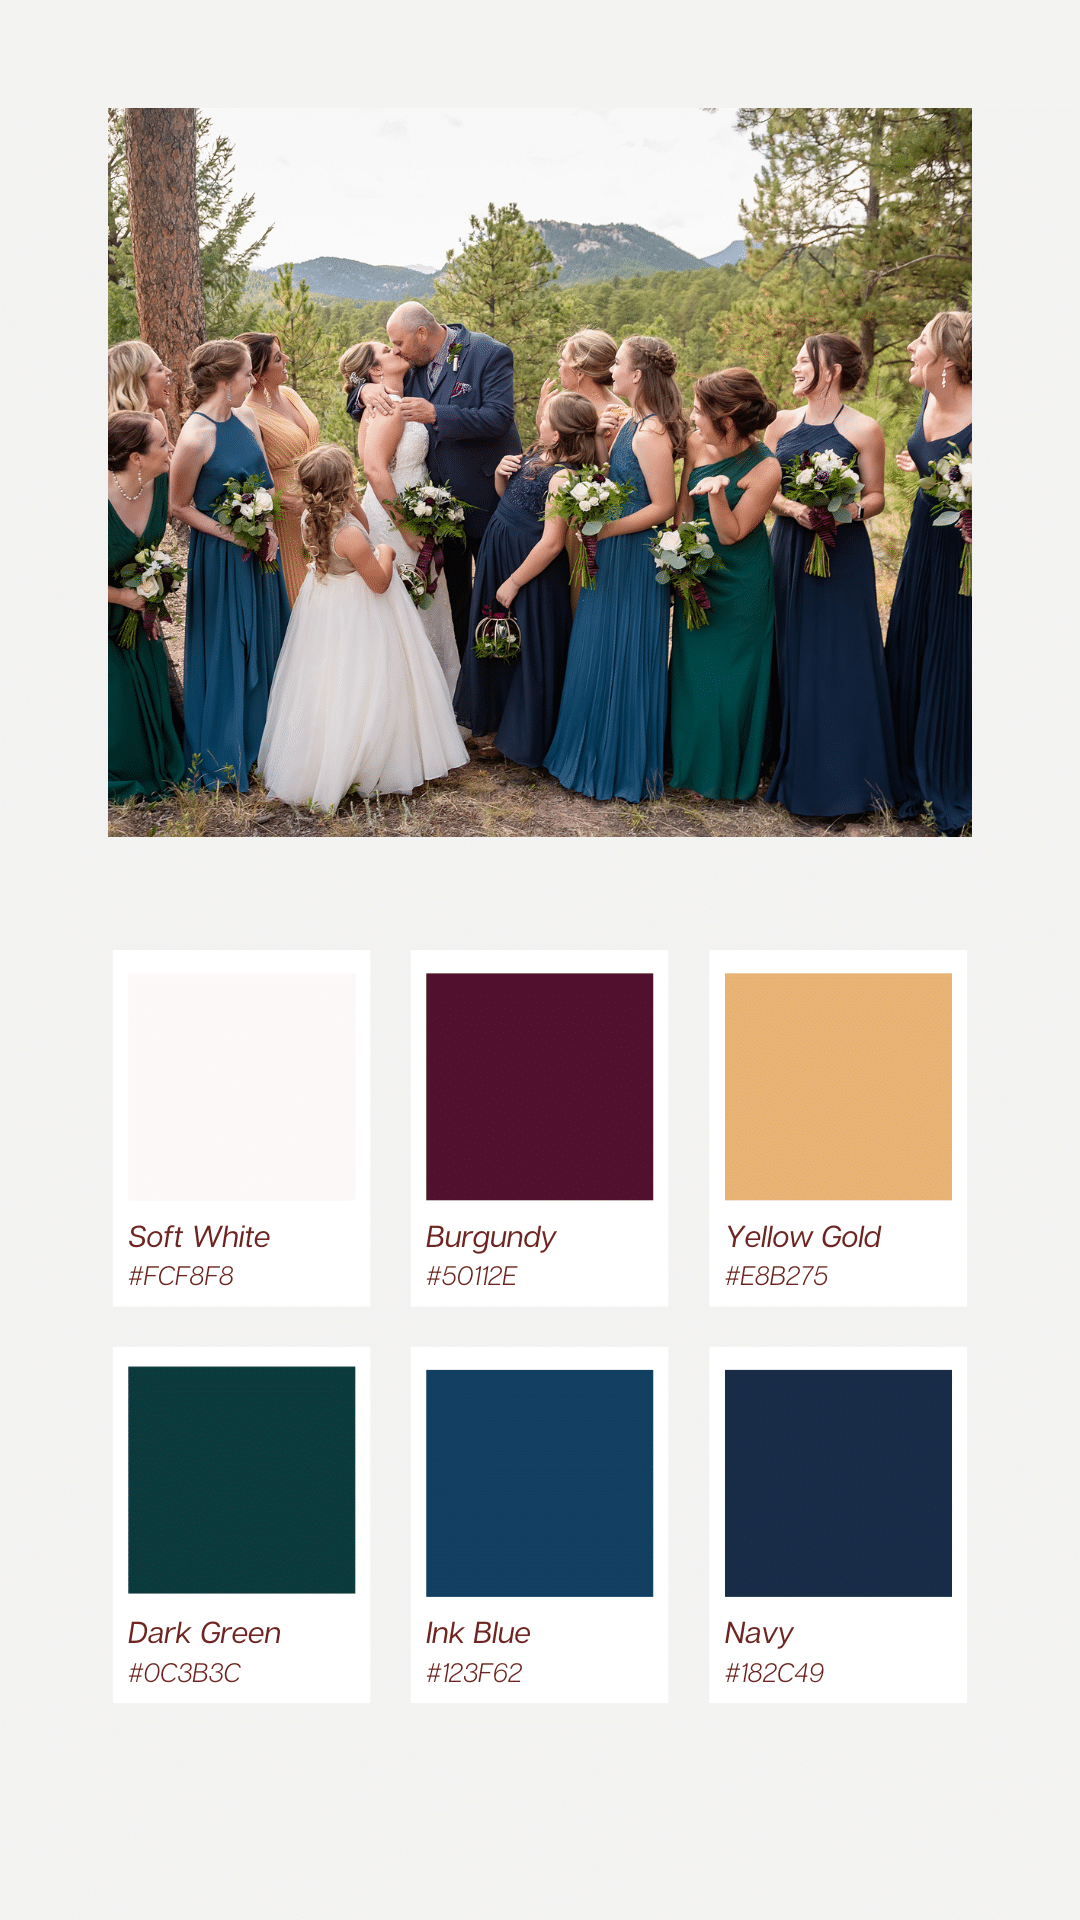 A large wedding party in various jewel tones of burgundy, gold, emerald, and sapphire.